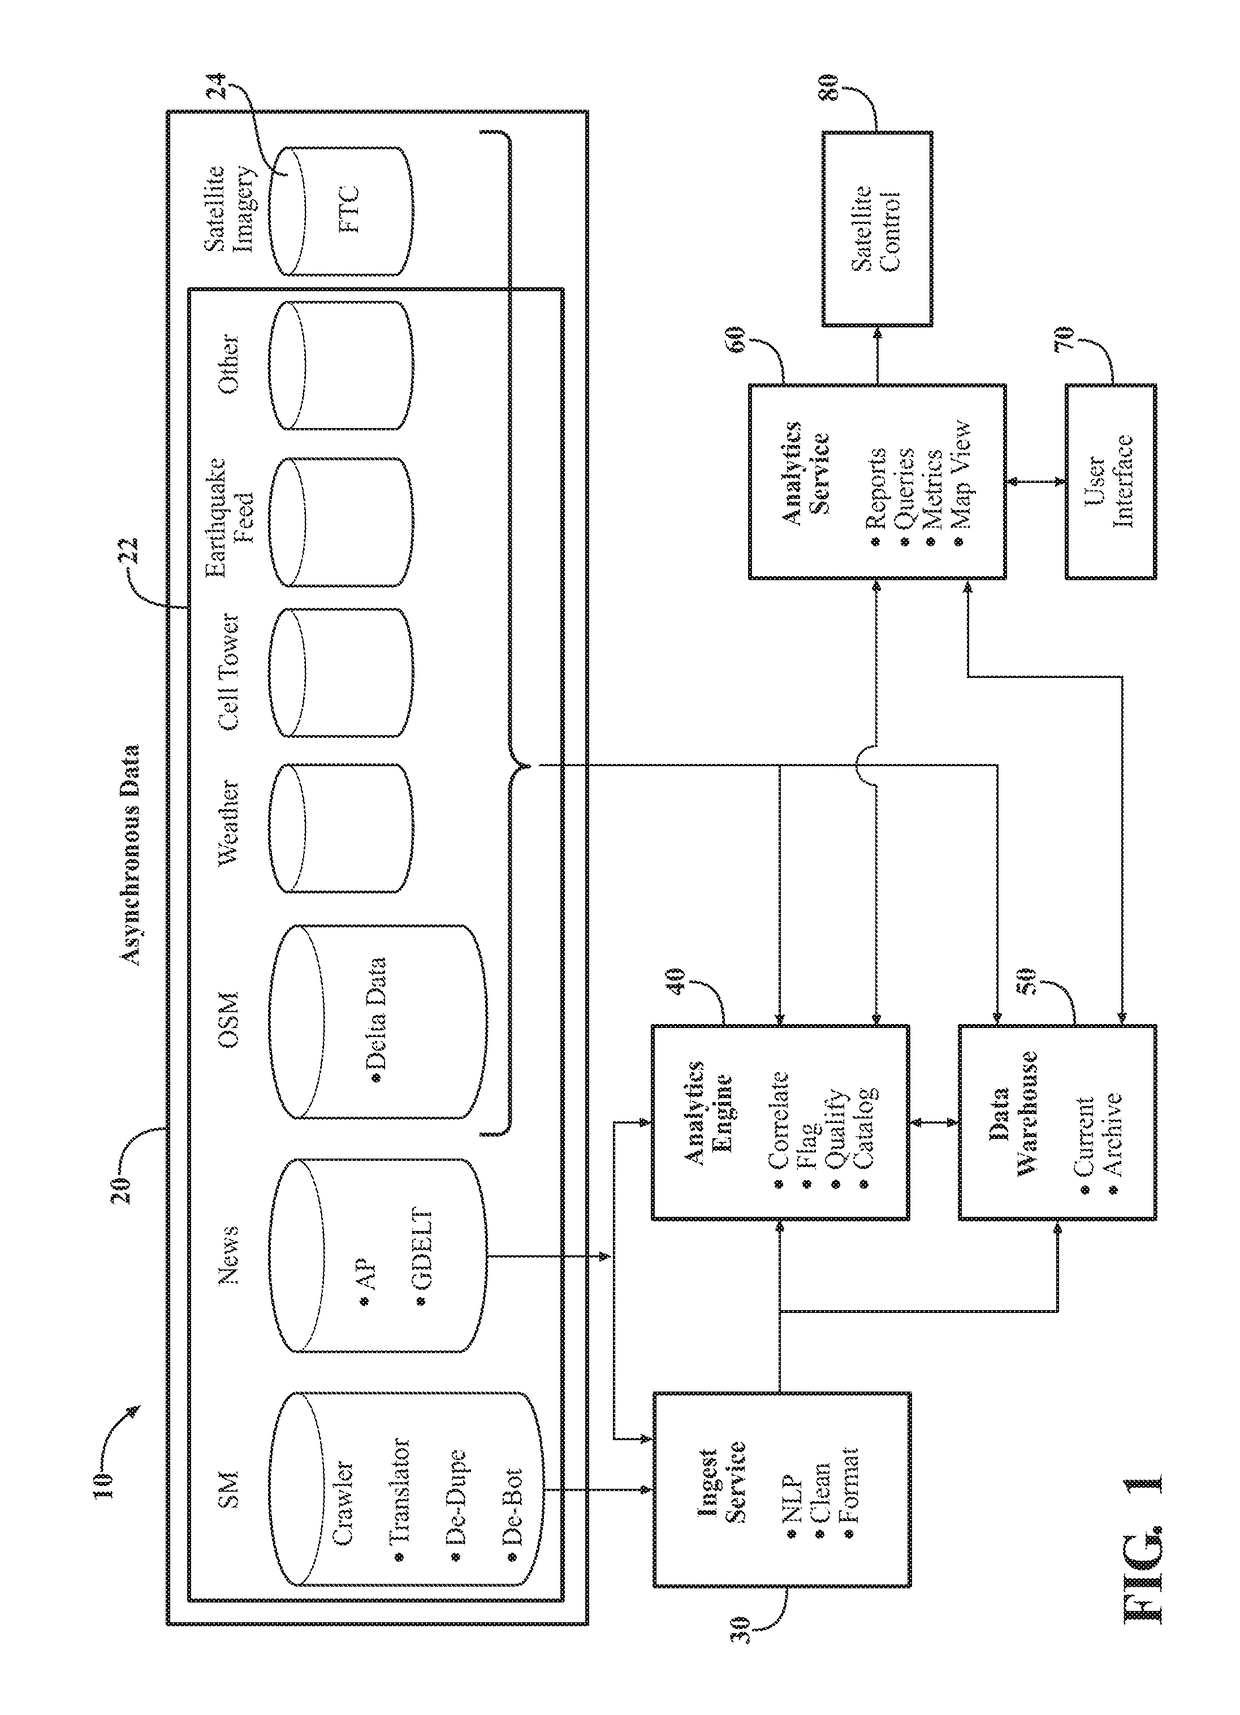 System and method for aggregating multi-source data and identifying geographic areas for data acquisition